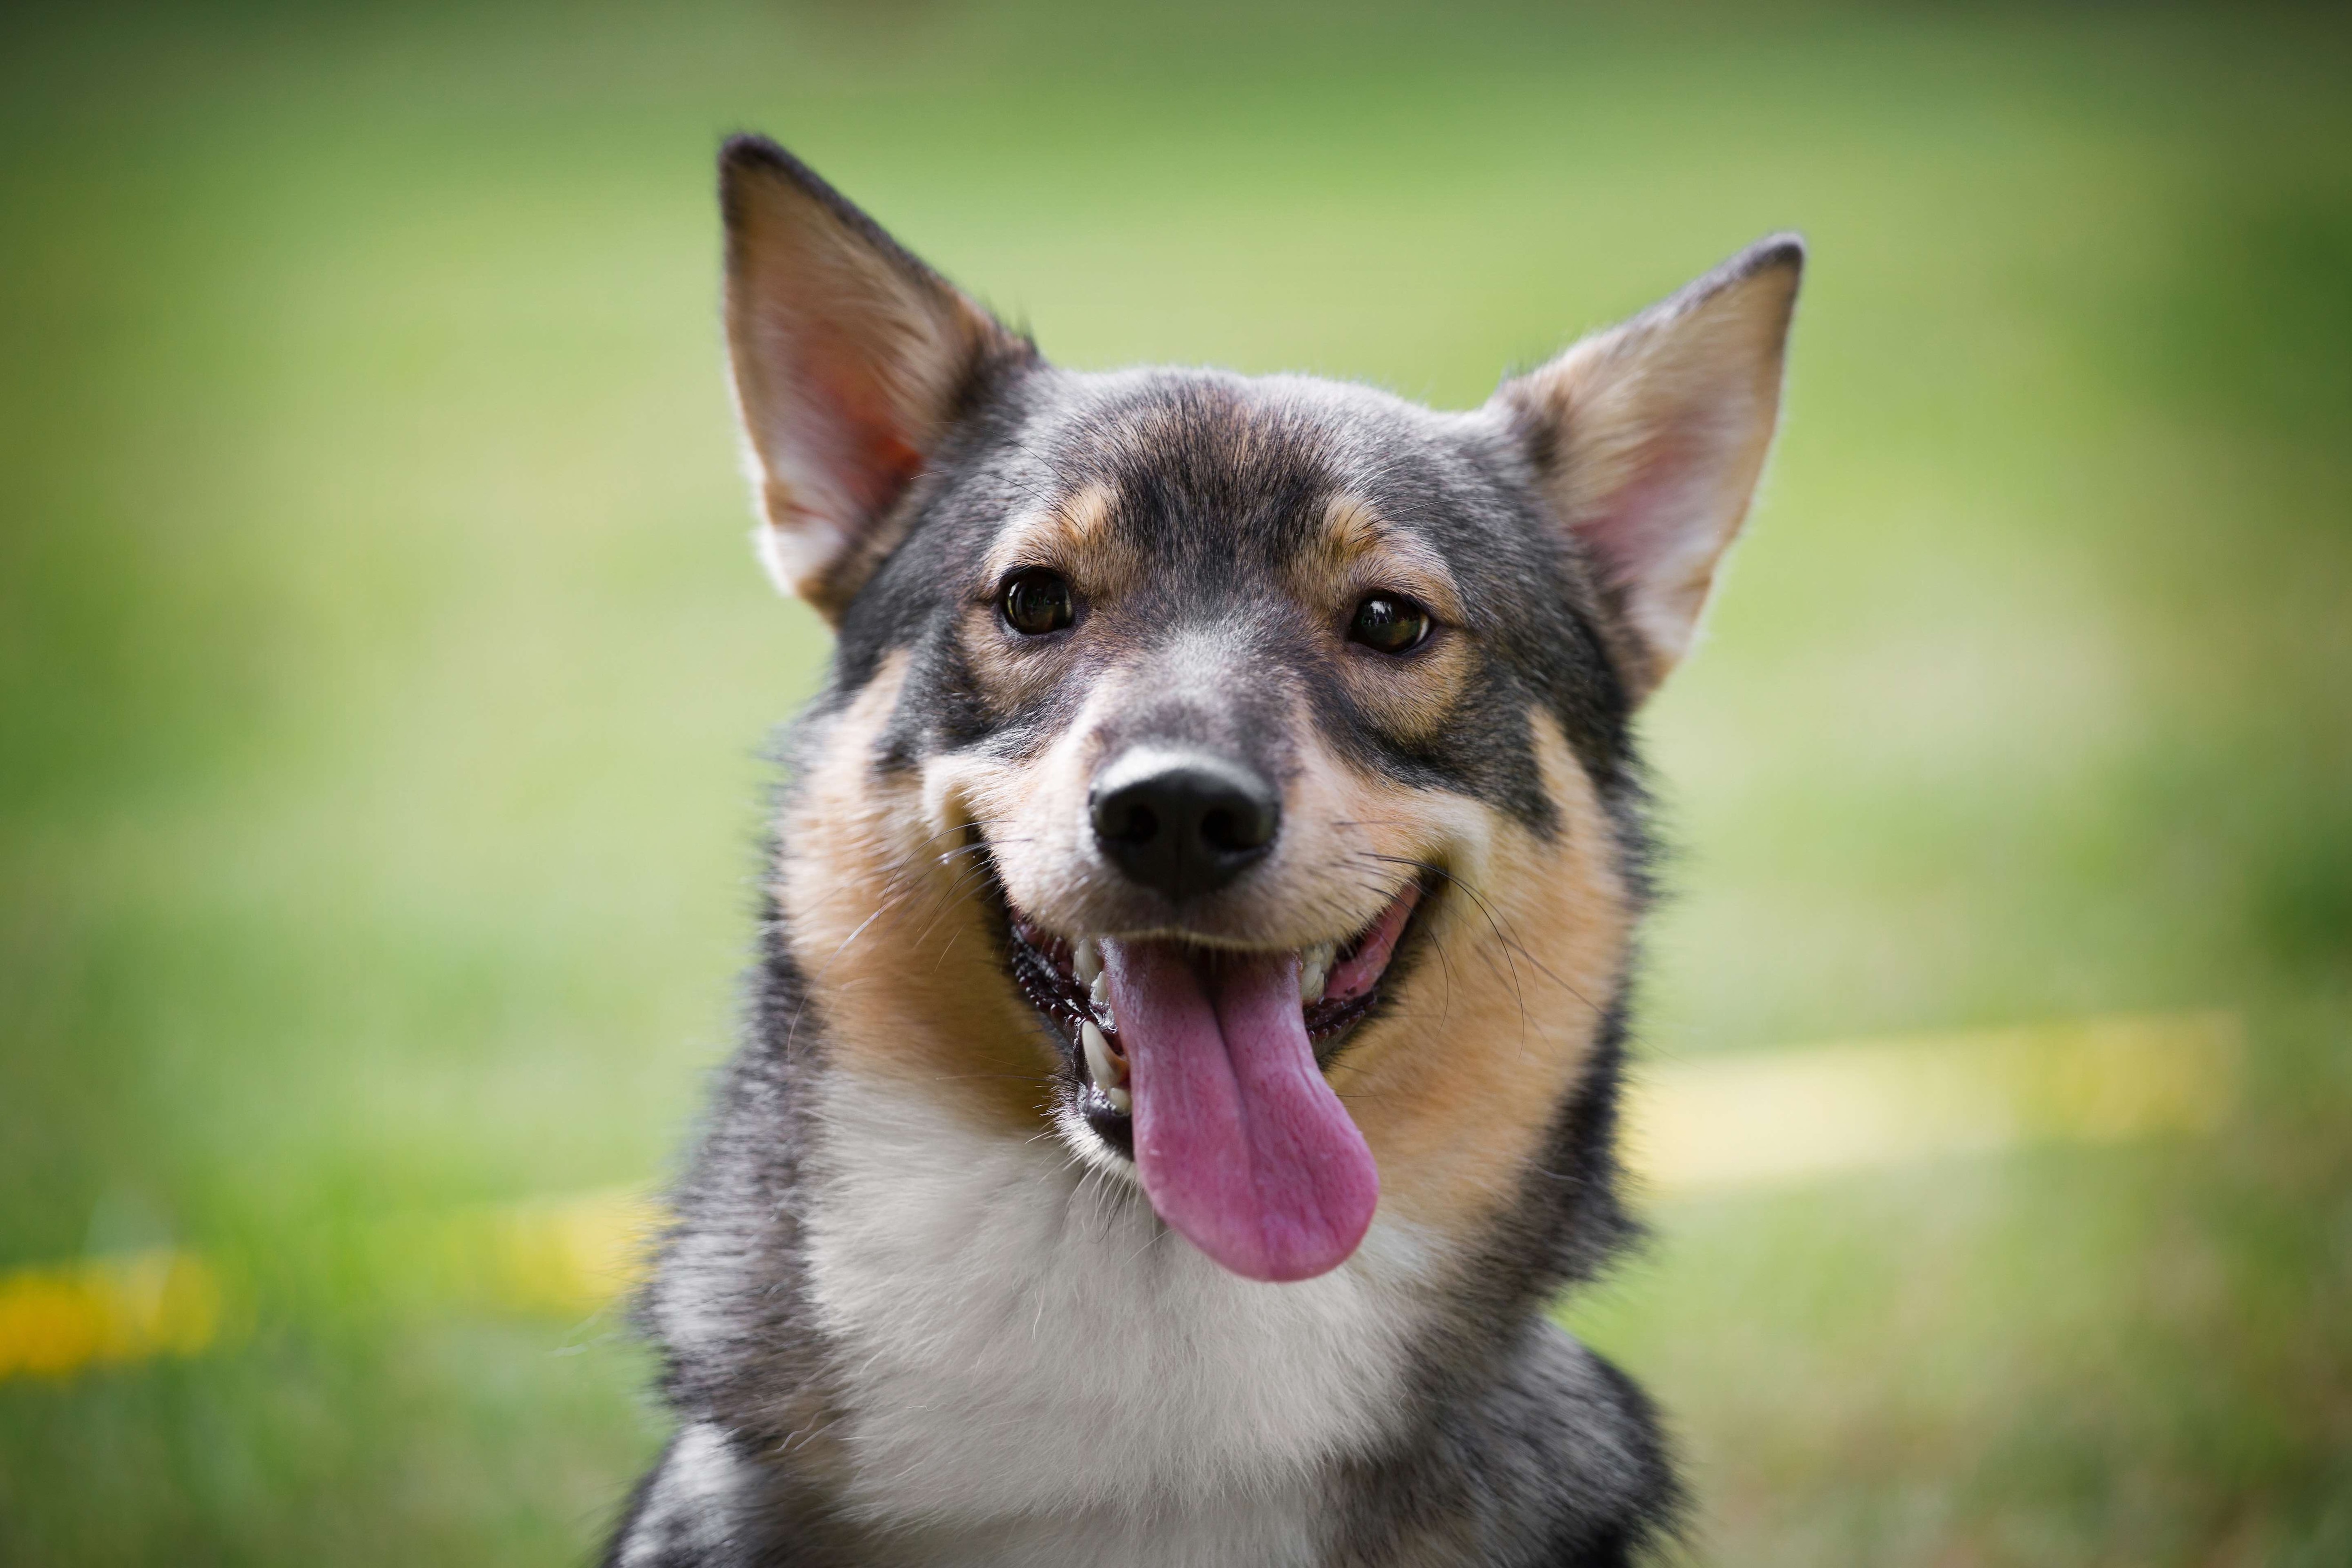 close-up of a swedish vallhund's face, who is smiling with his tongue out